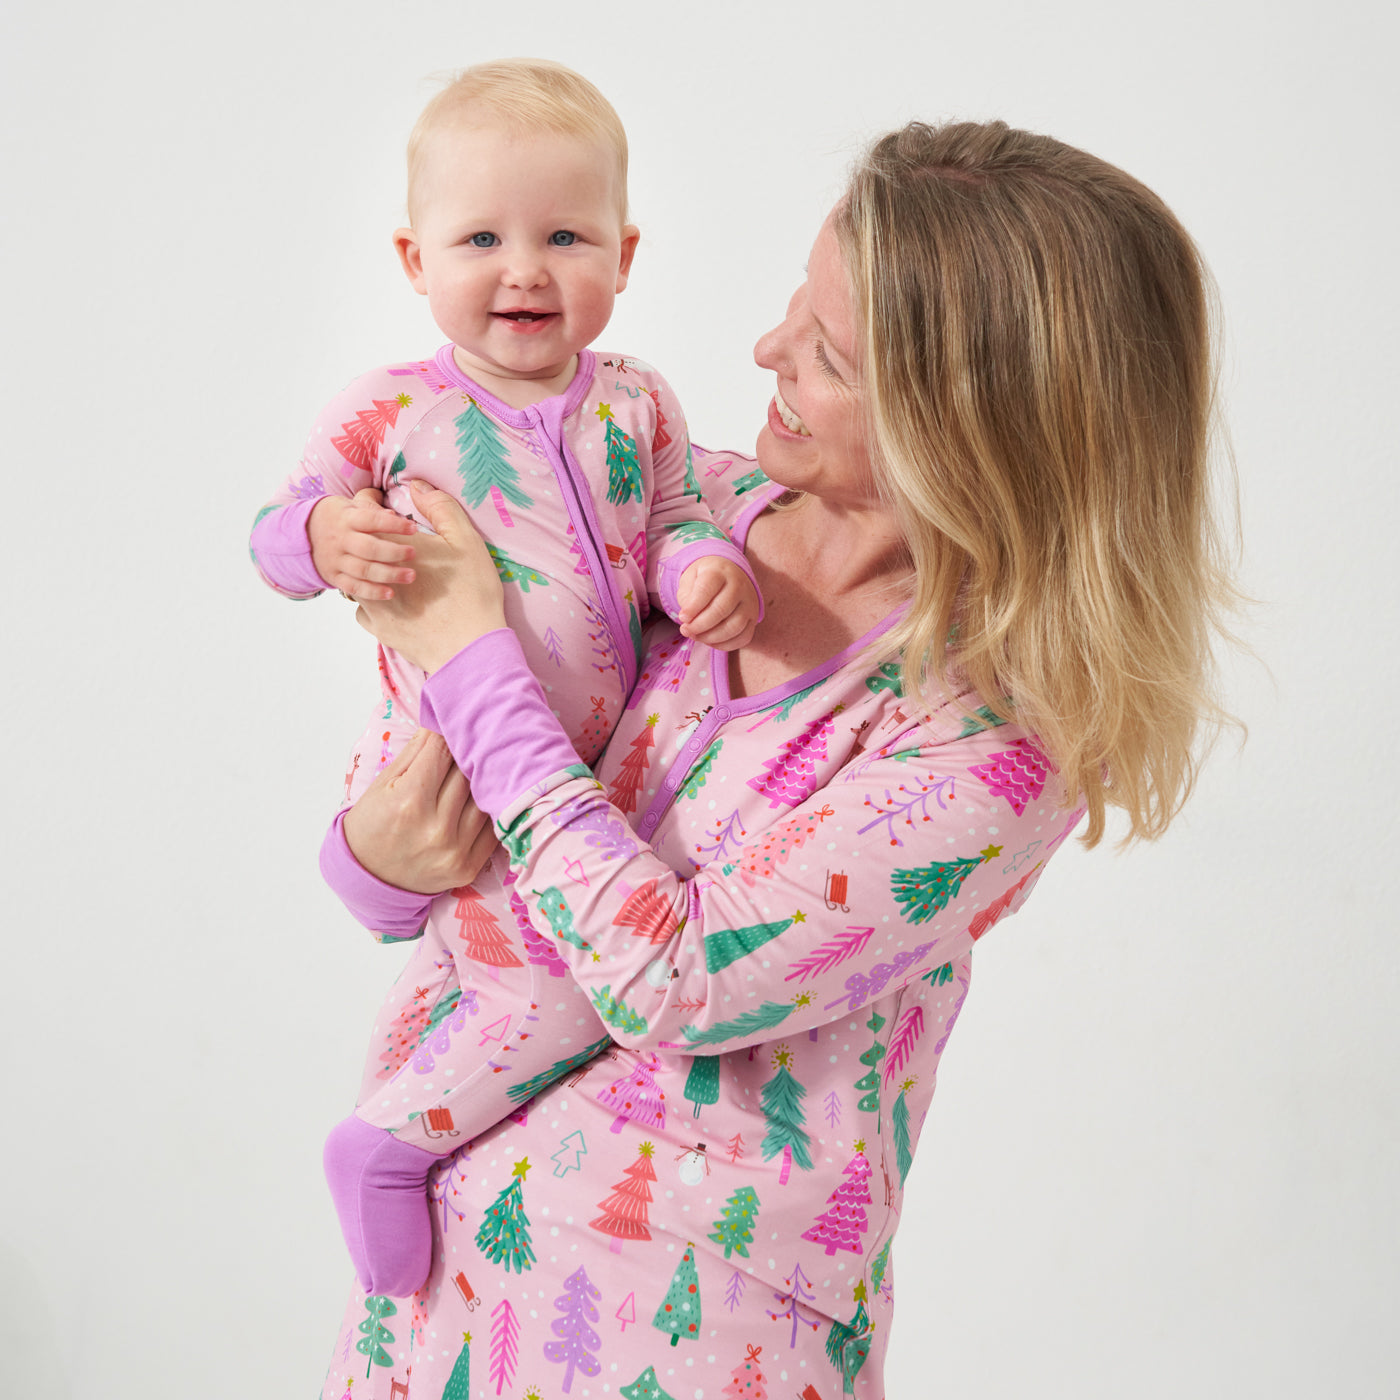 Mother holding her daughter wearing a Pink Merry and Bright printed women's pajama top and matching bottoms. Her daughter is wearing a Pink Merry and Bright zippy